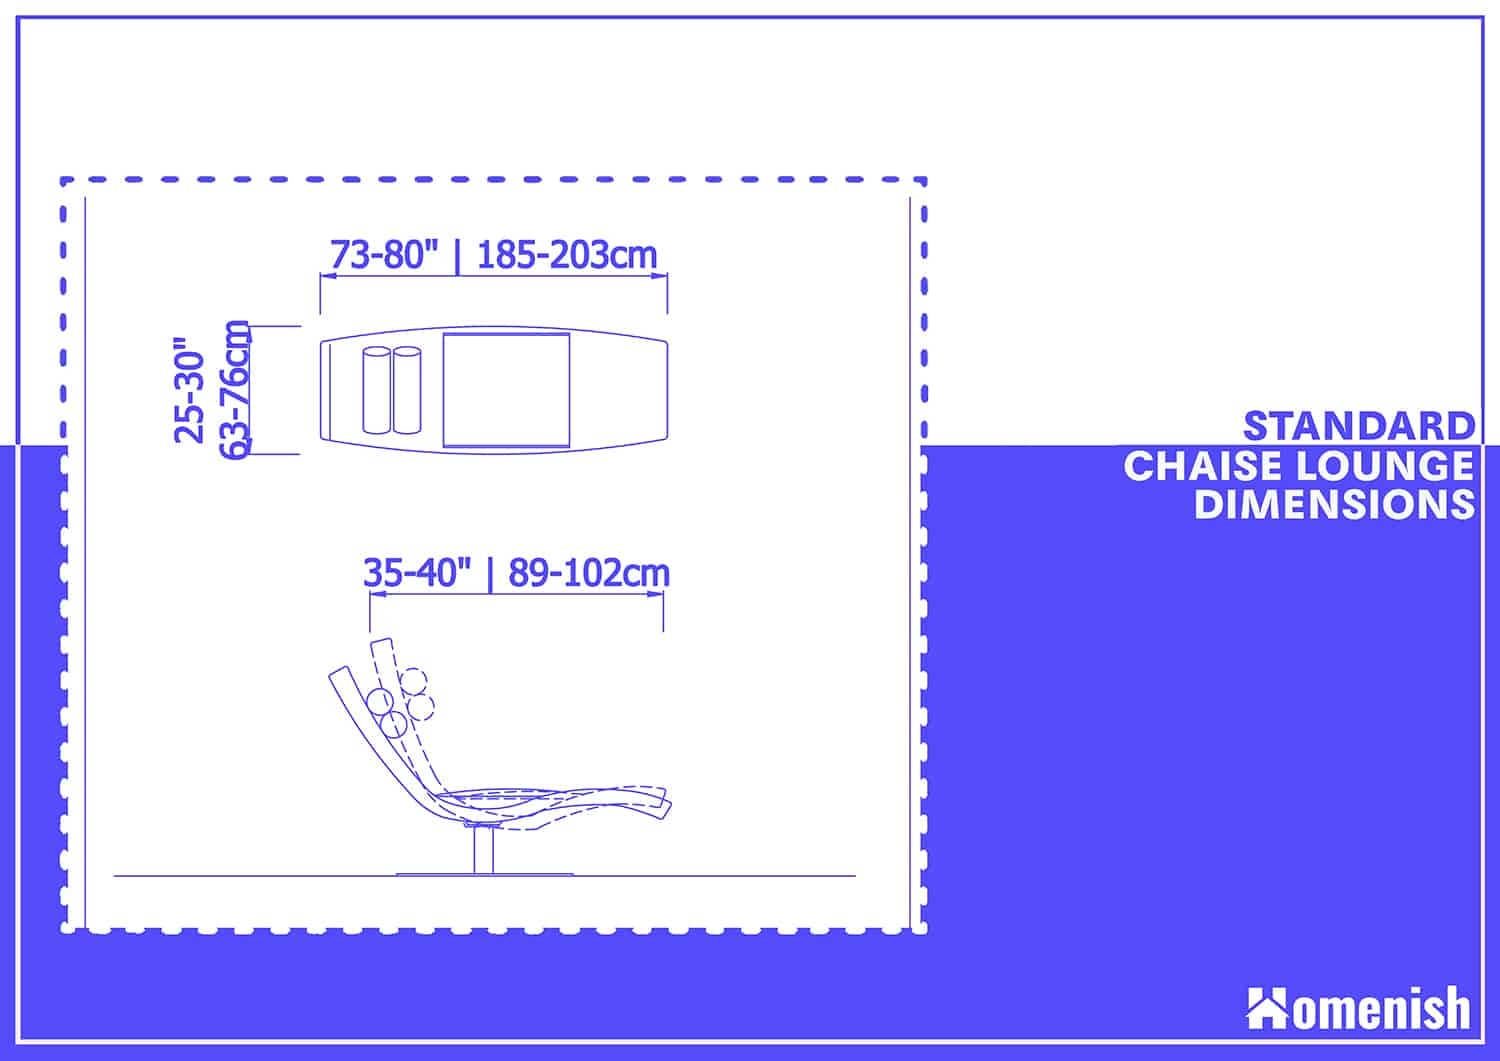 Standard Chaise Lounge Dimensions